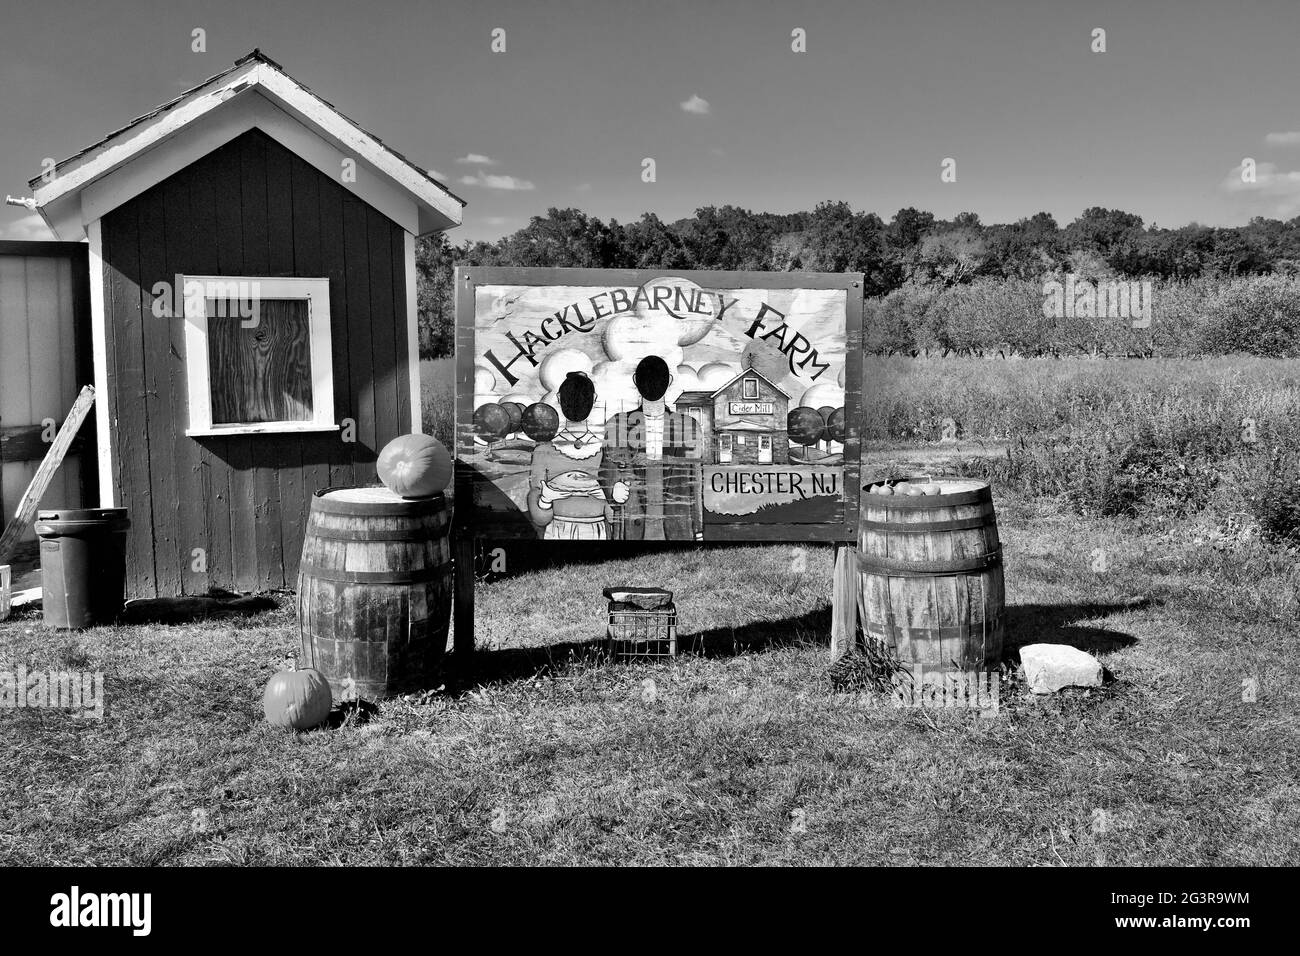 Hacklebarney Farm, Chester New Jersey, USA.  Seasonal farm for Apples, Pumpkins, Corn, it is a “Pick Your Own” or PYO farm. Stock Photo